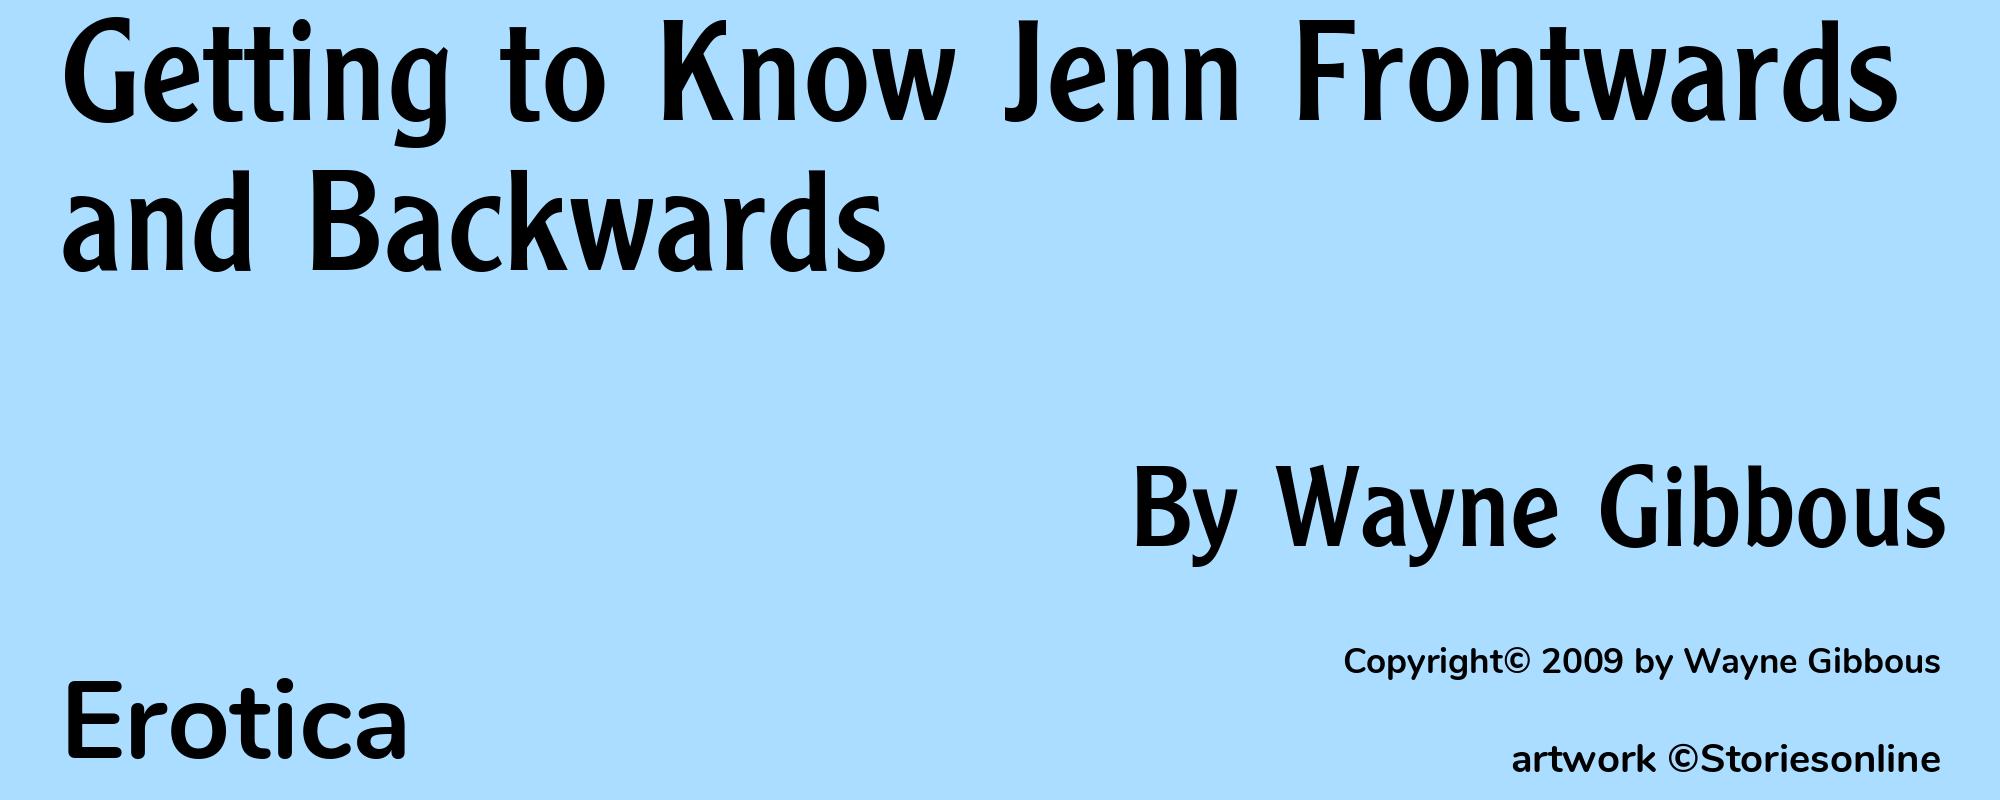 Getting to Know Jenn Frontwards and Backwards - Cover